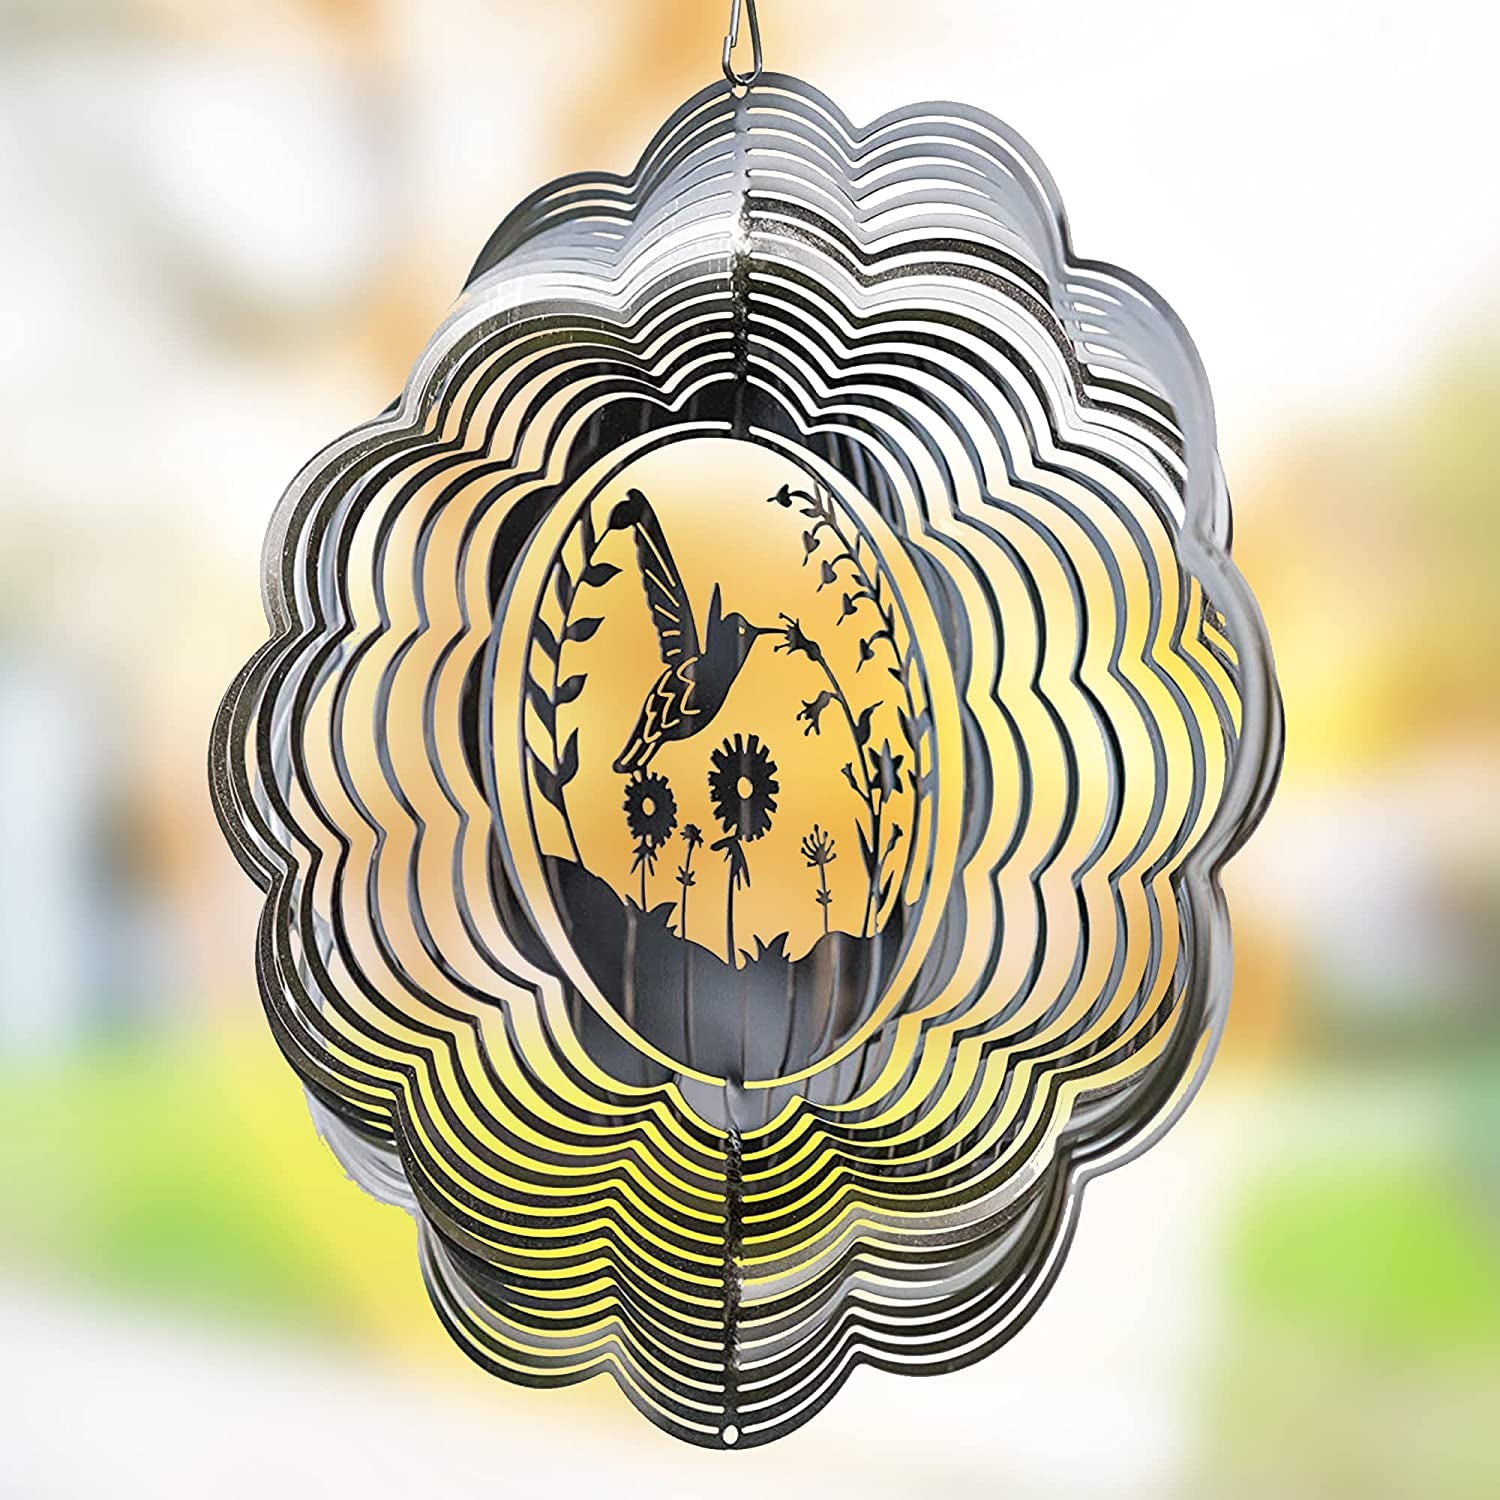  Kinetic Wind Spinner for Yard and Garden Wind Spinner Outdoor Metal Large Hanging Plantary Decor 3D Garden Art Wind Sculpture Spinners Kinetic Art Garden Decorations